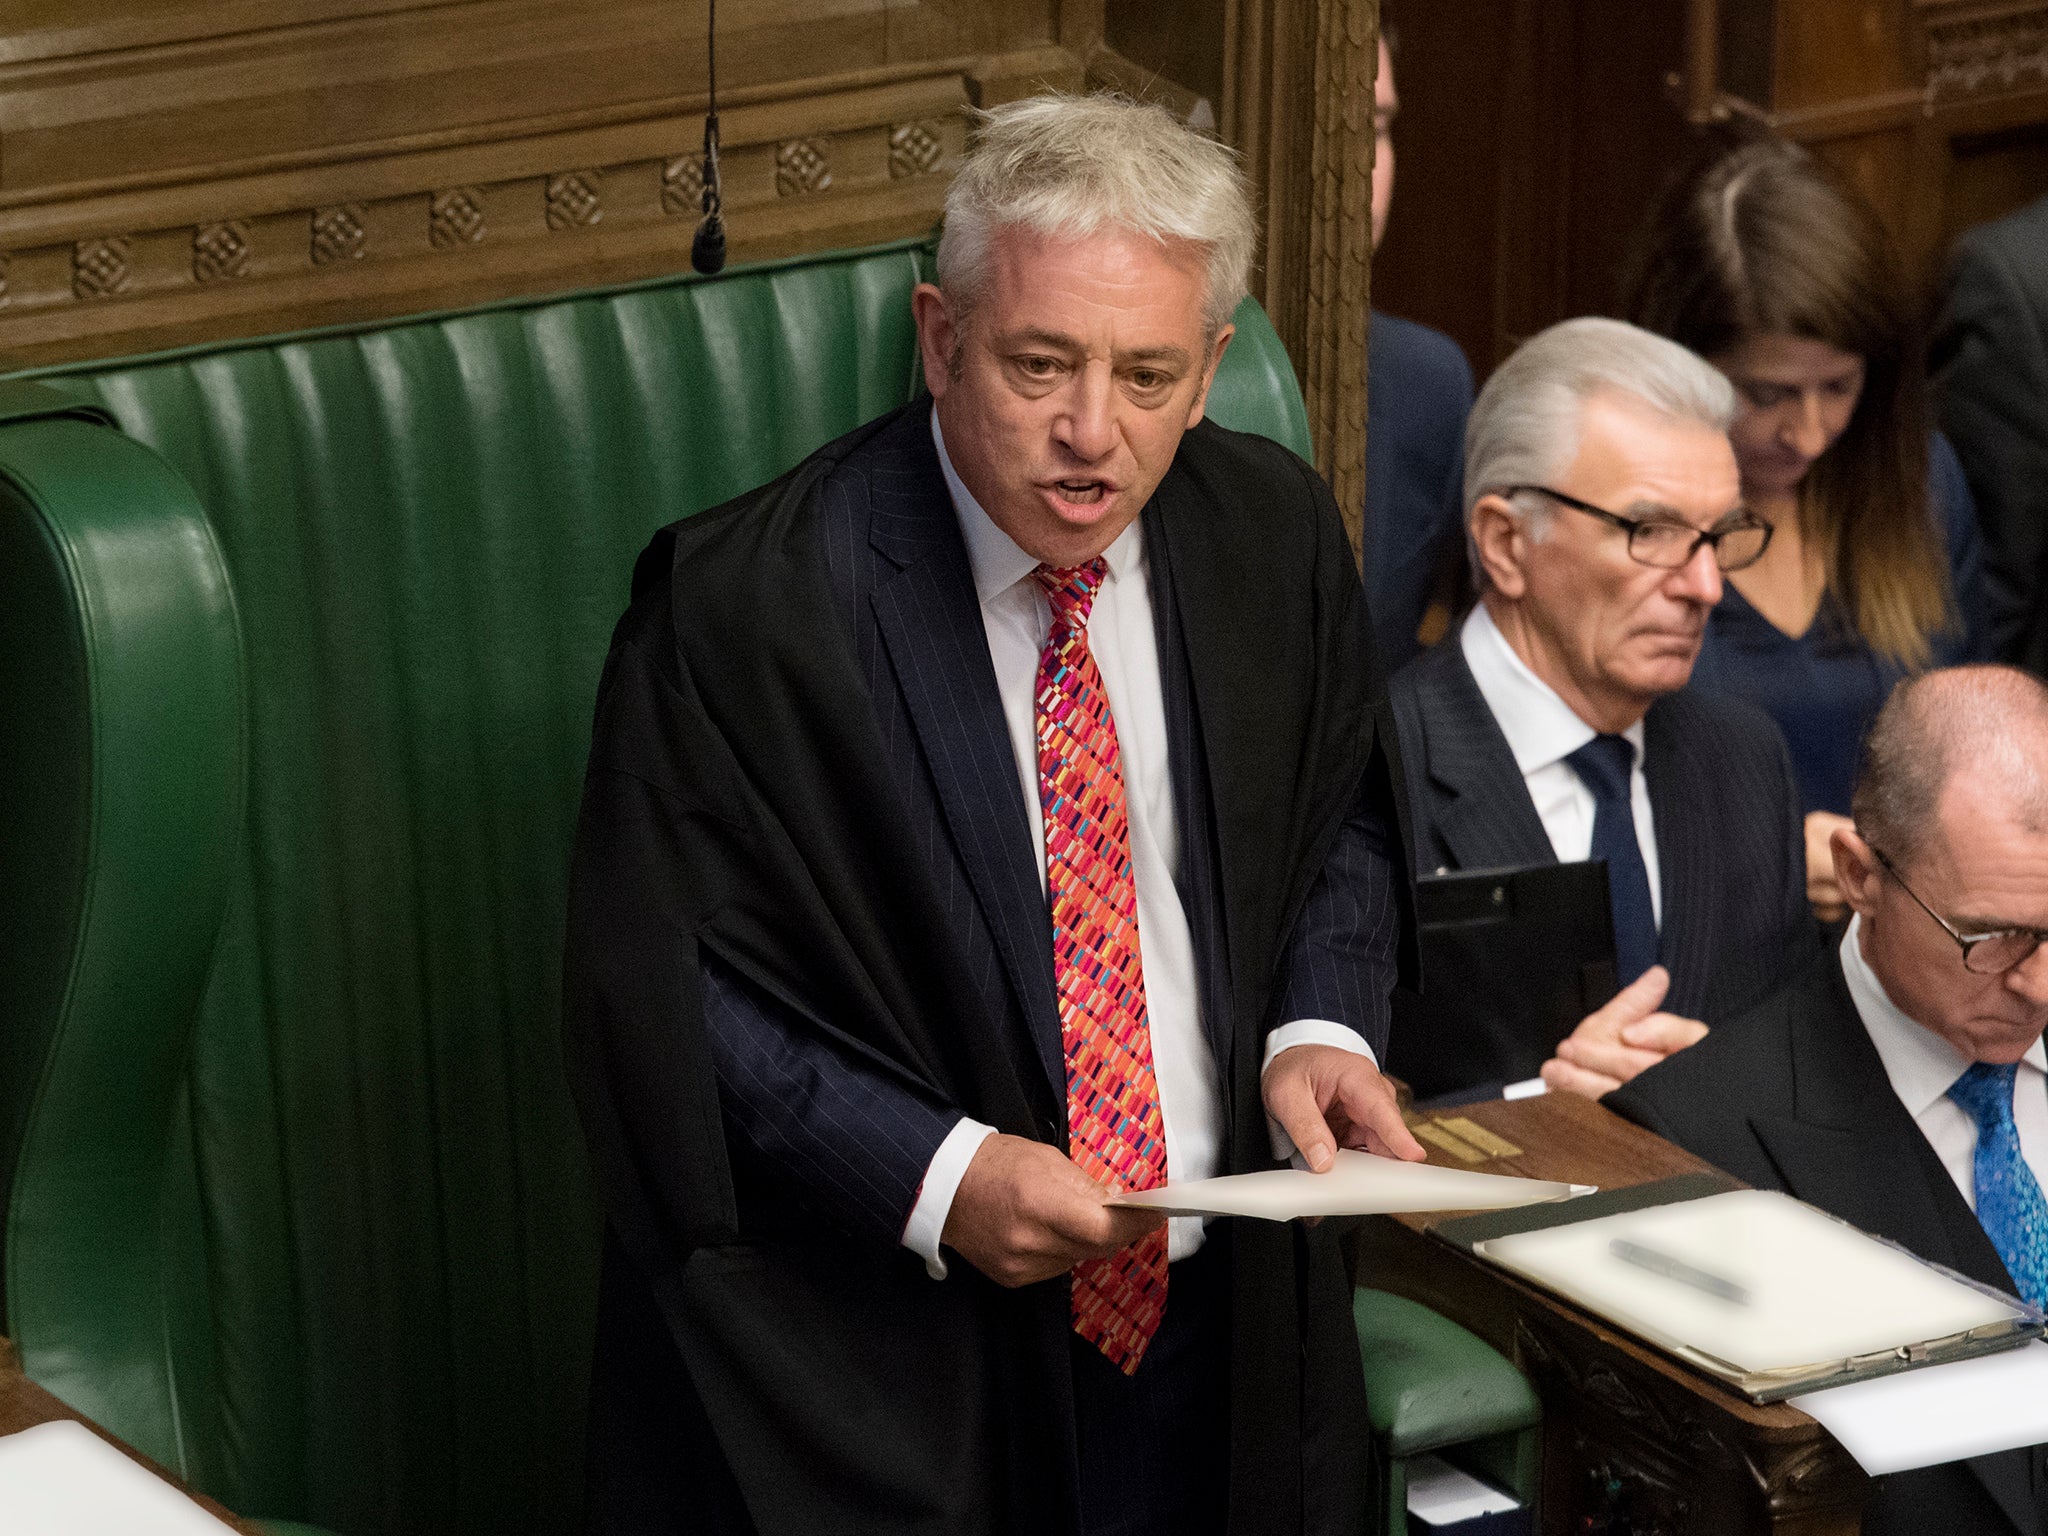 During his time as speaker, he was seen as a thorn in the side of the government over Brexit